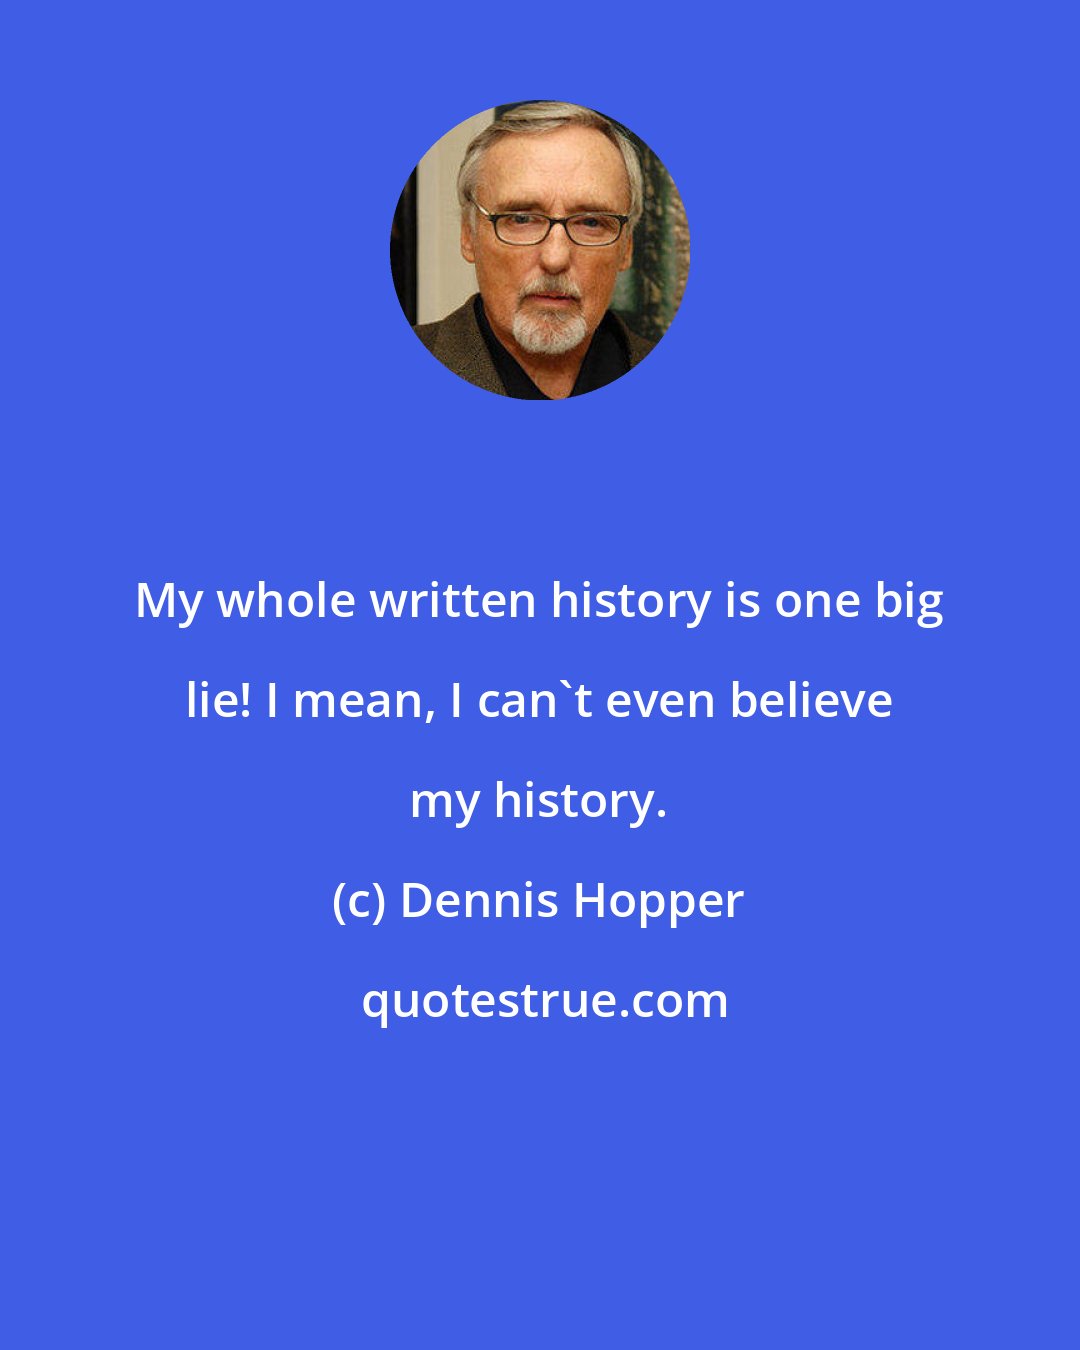 Dennis Hopper: My whole written history is one big lie! I mean, I can't even believe my history.